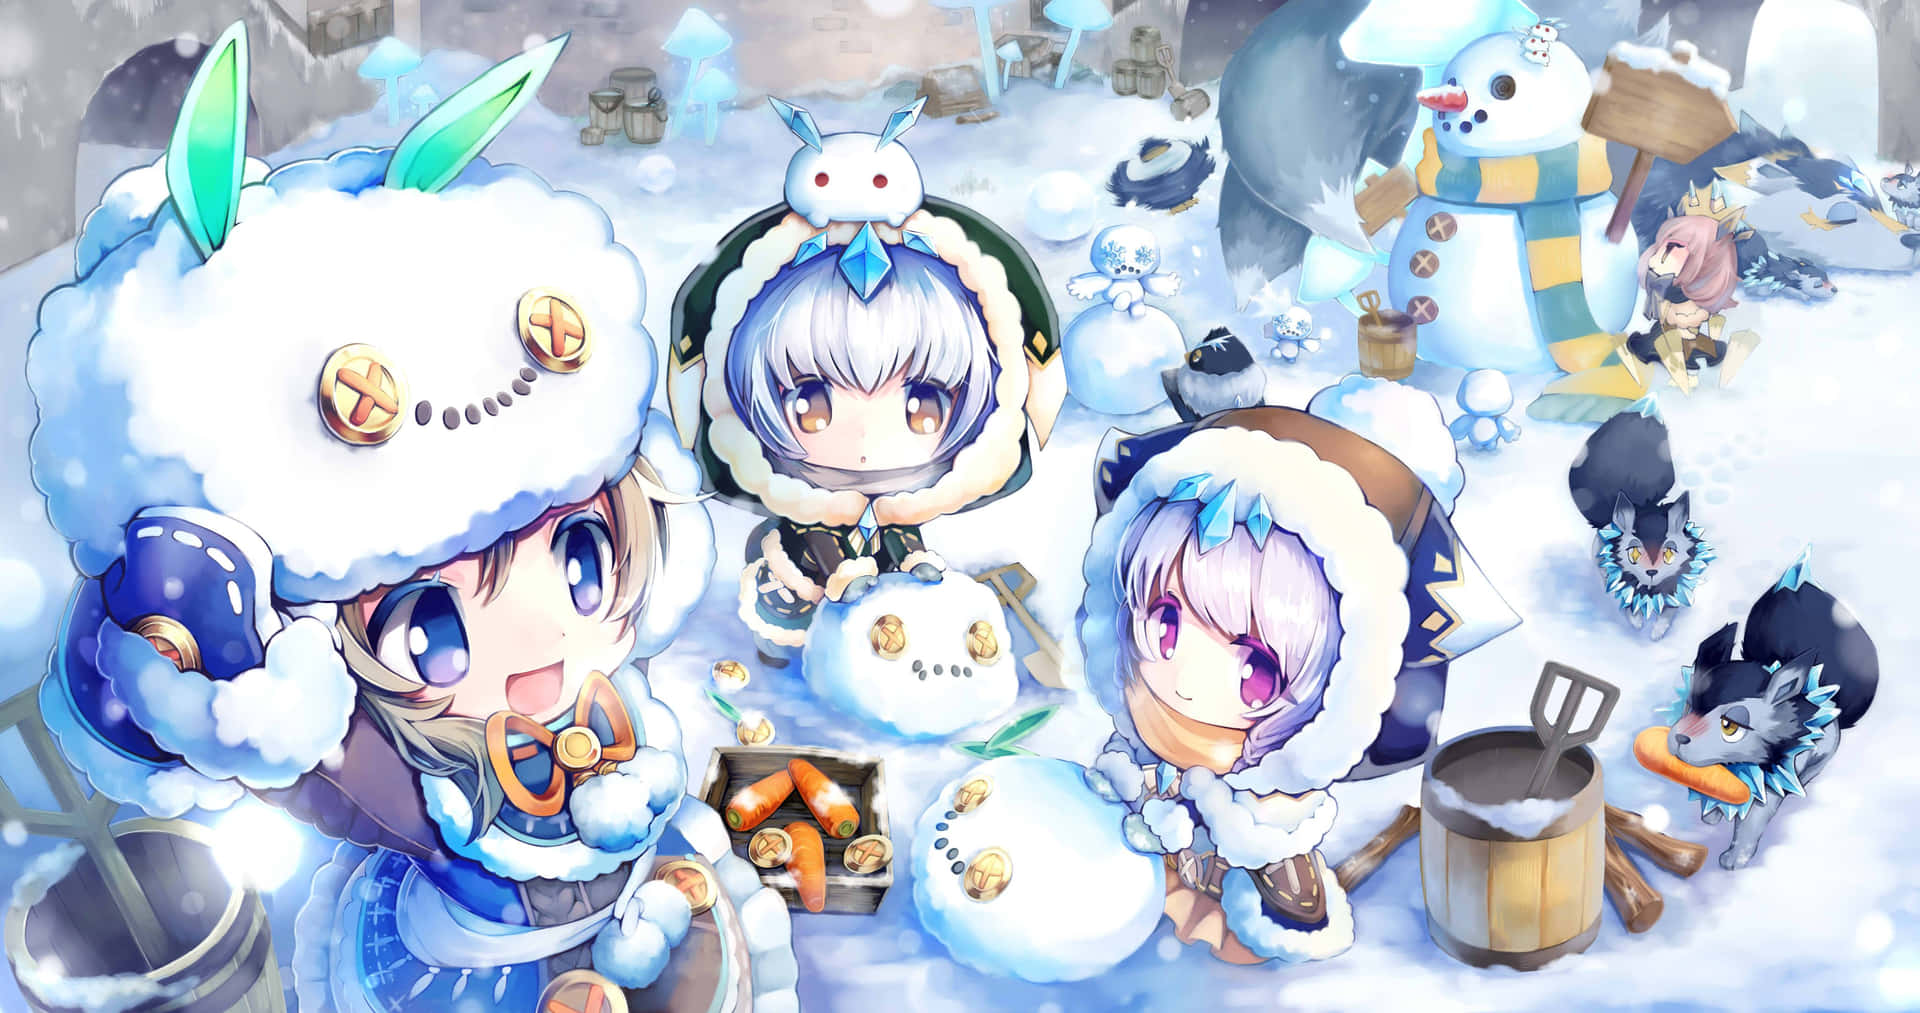 A Group Of Anime Characters In The Snow